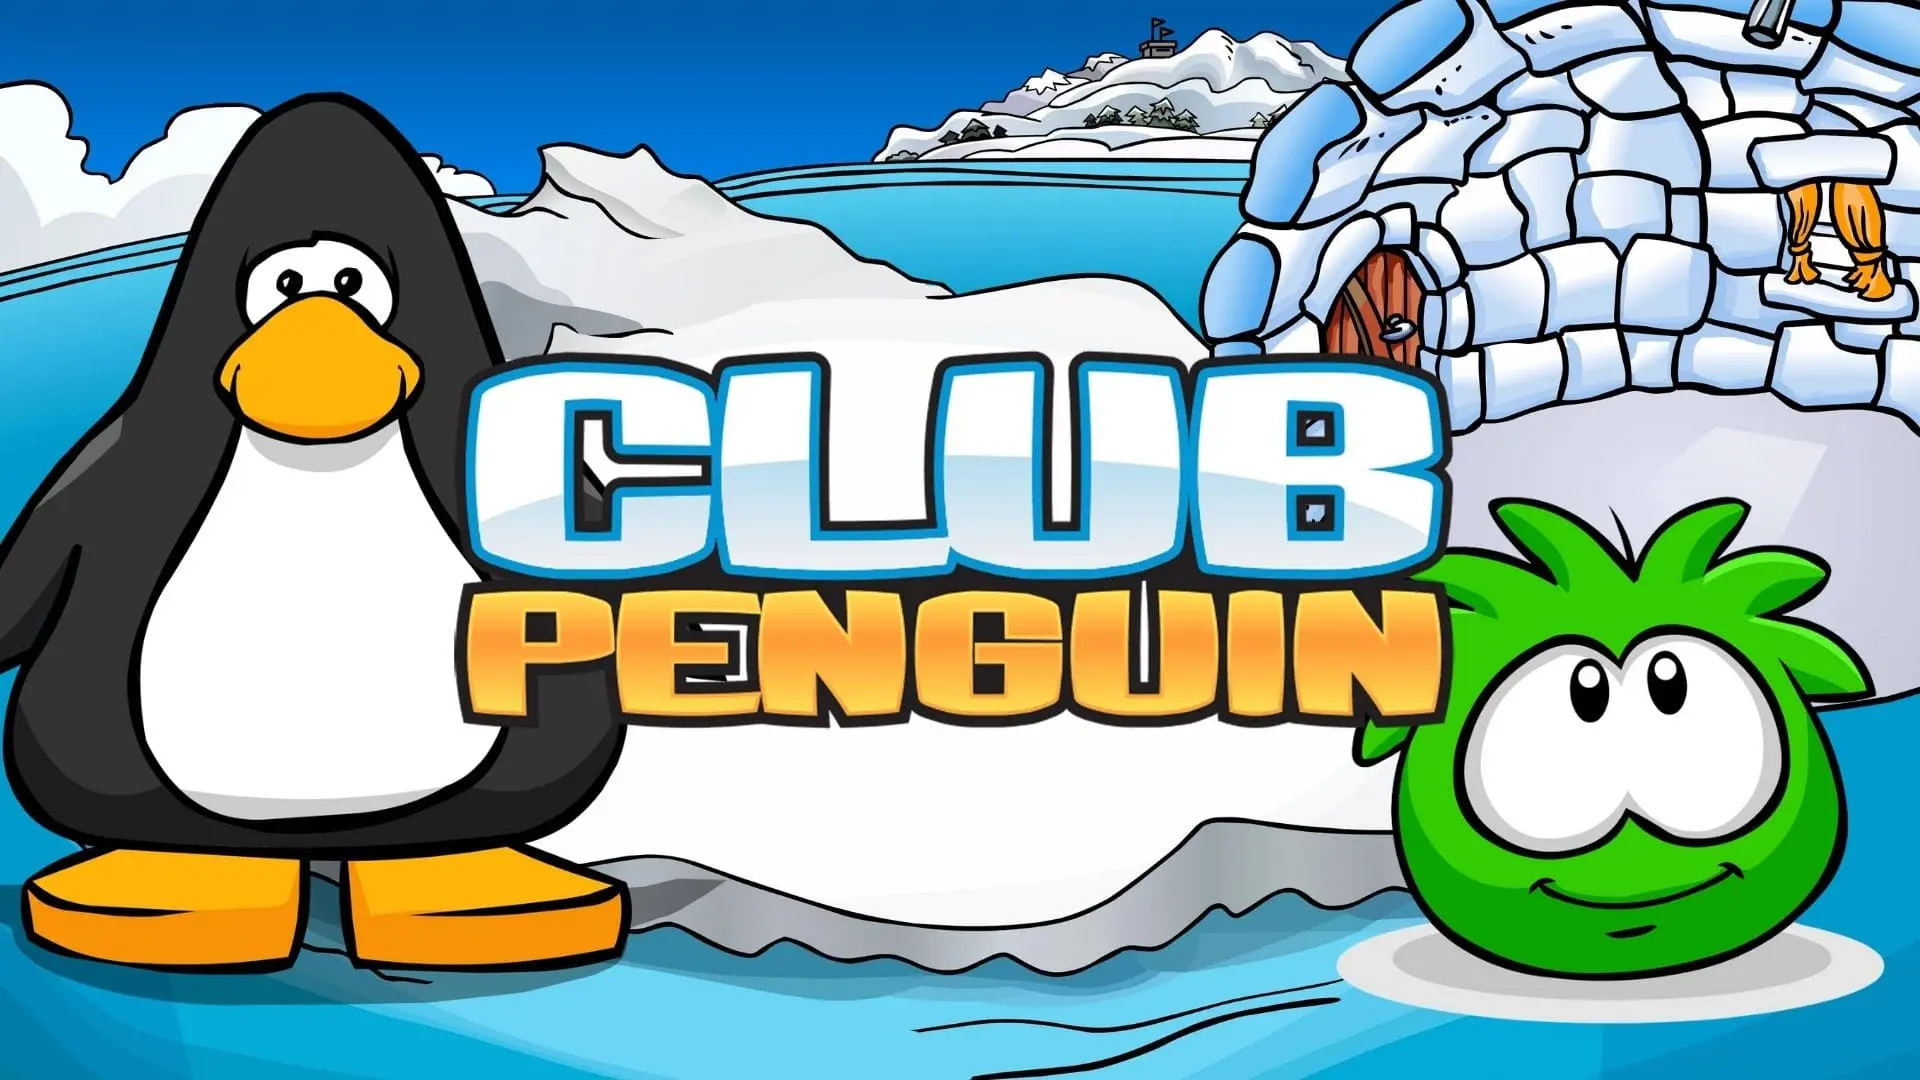 Disney Club Penguin Mix 'n Match Figure Packs with Coins & Cards